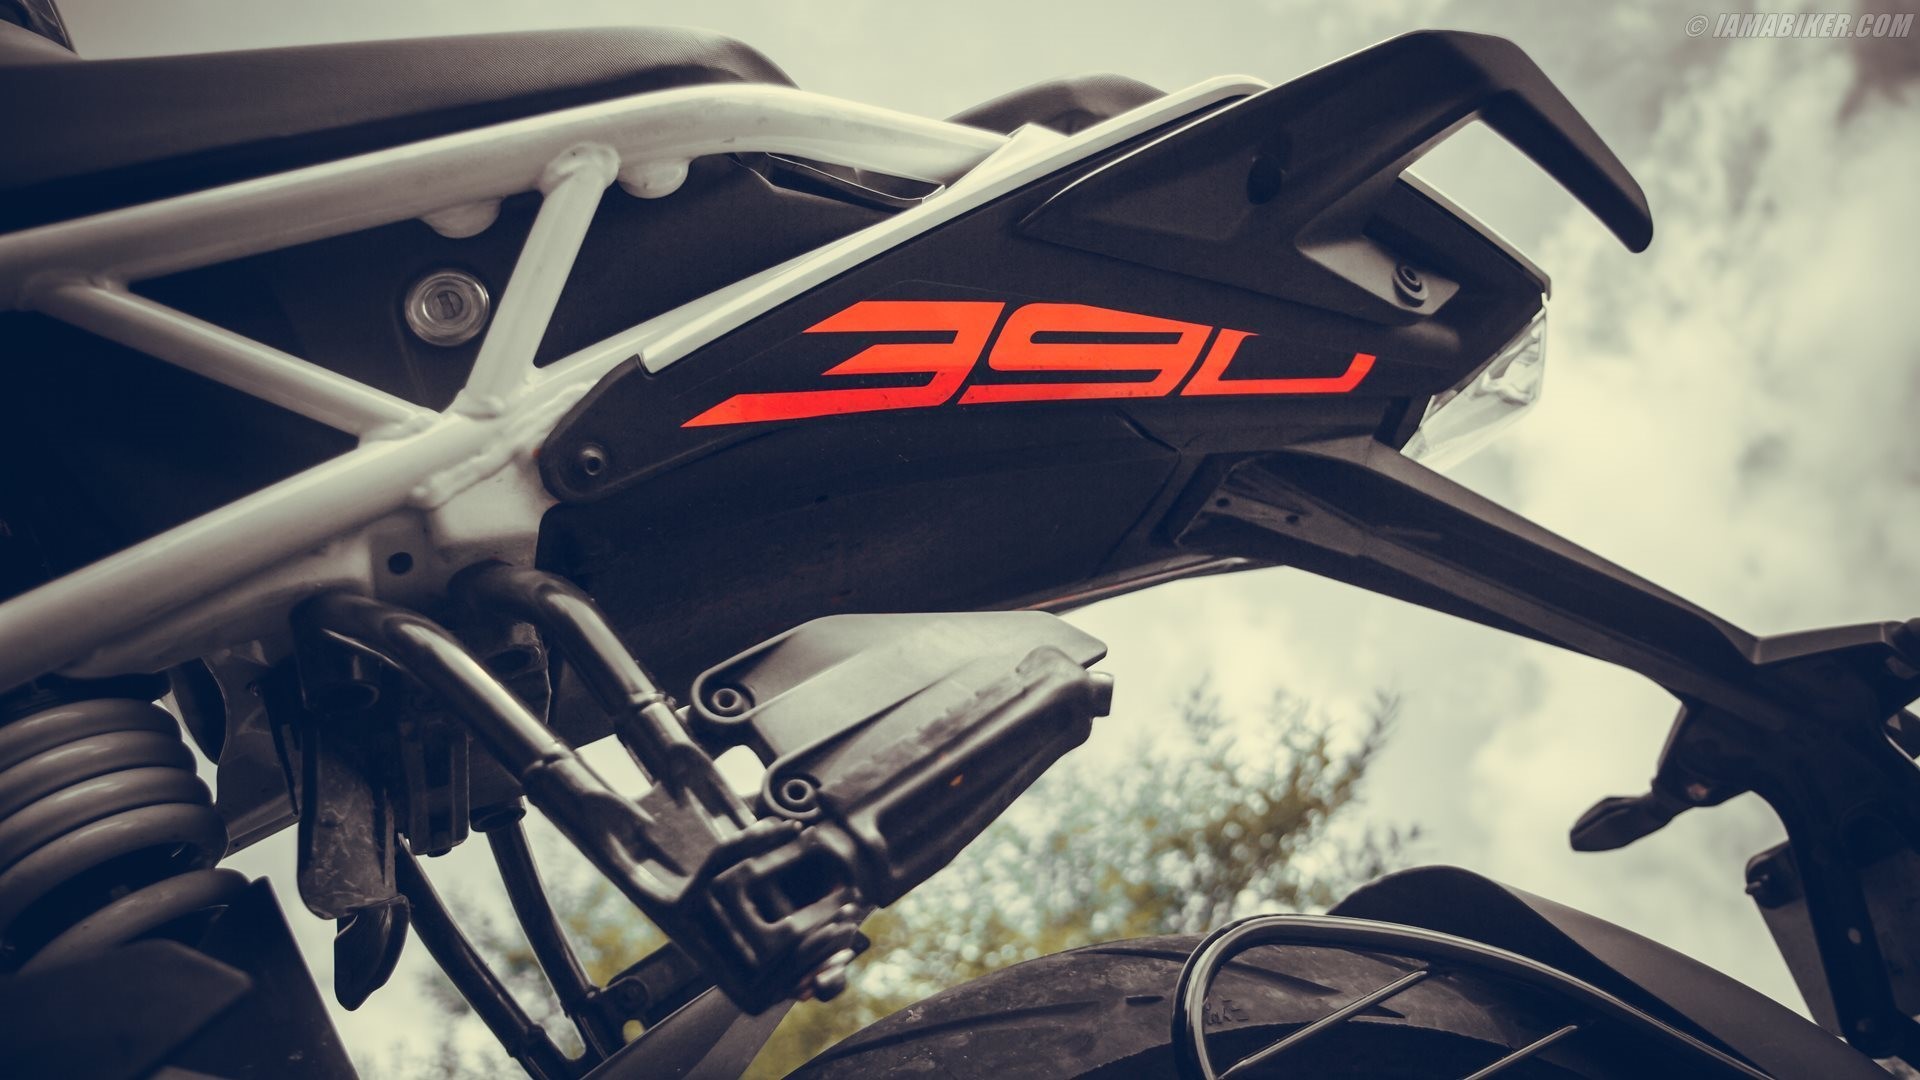 1920x1080 Also check out great recommendations and products to customise your KTM ...